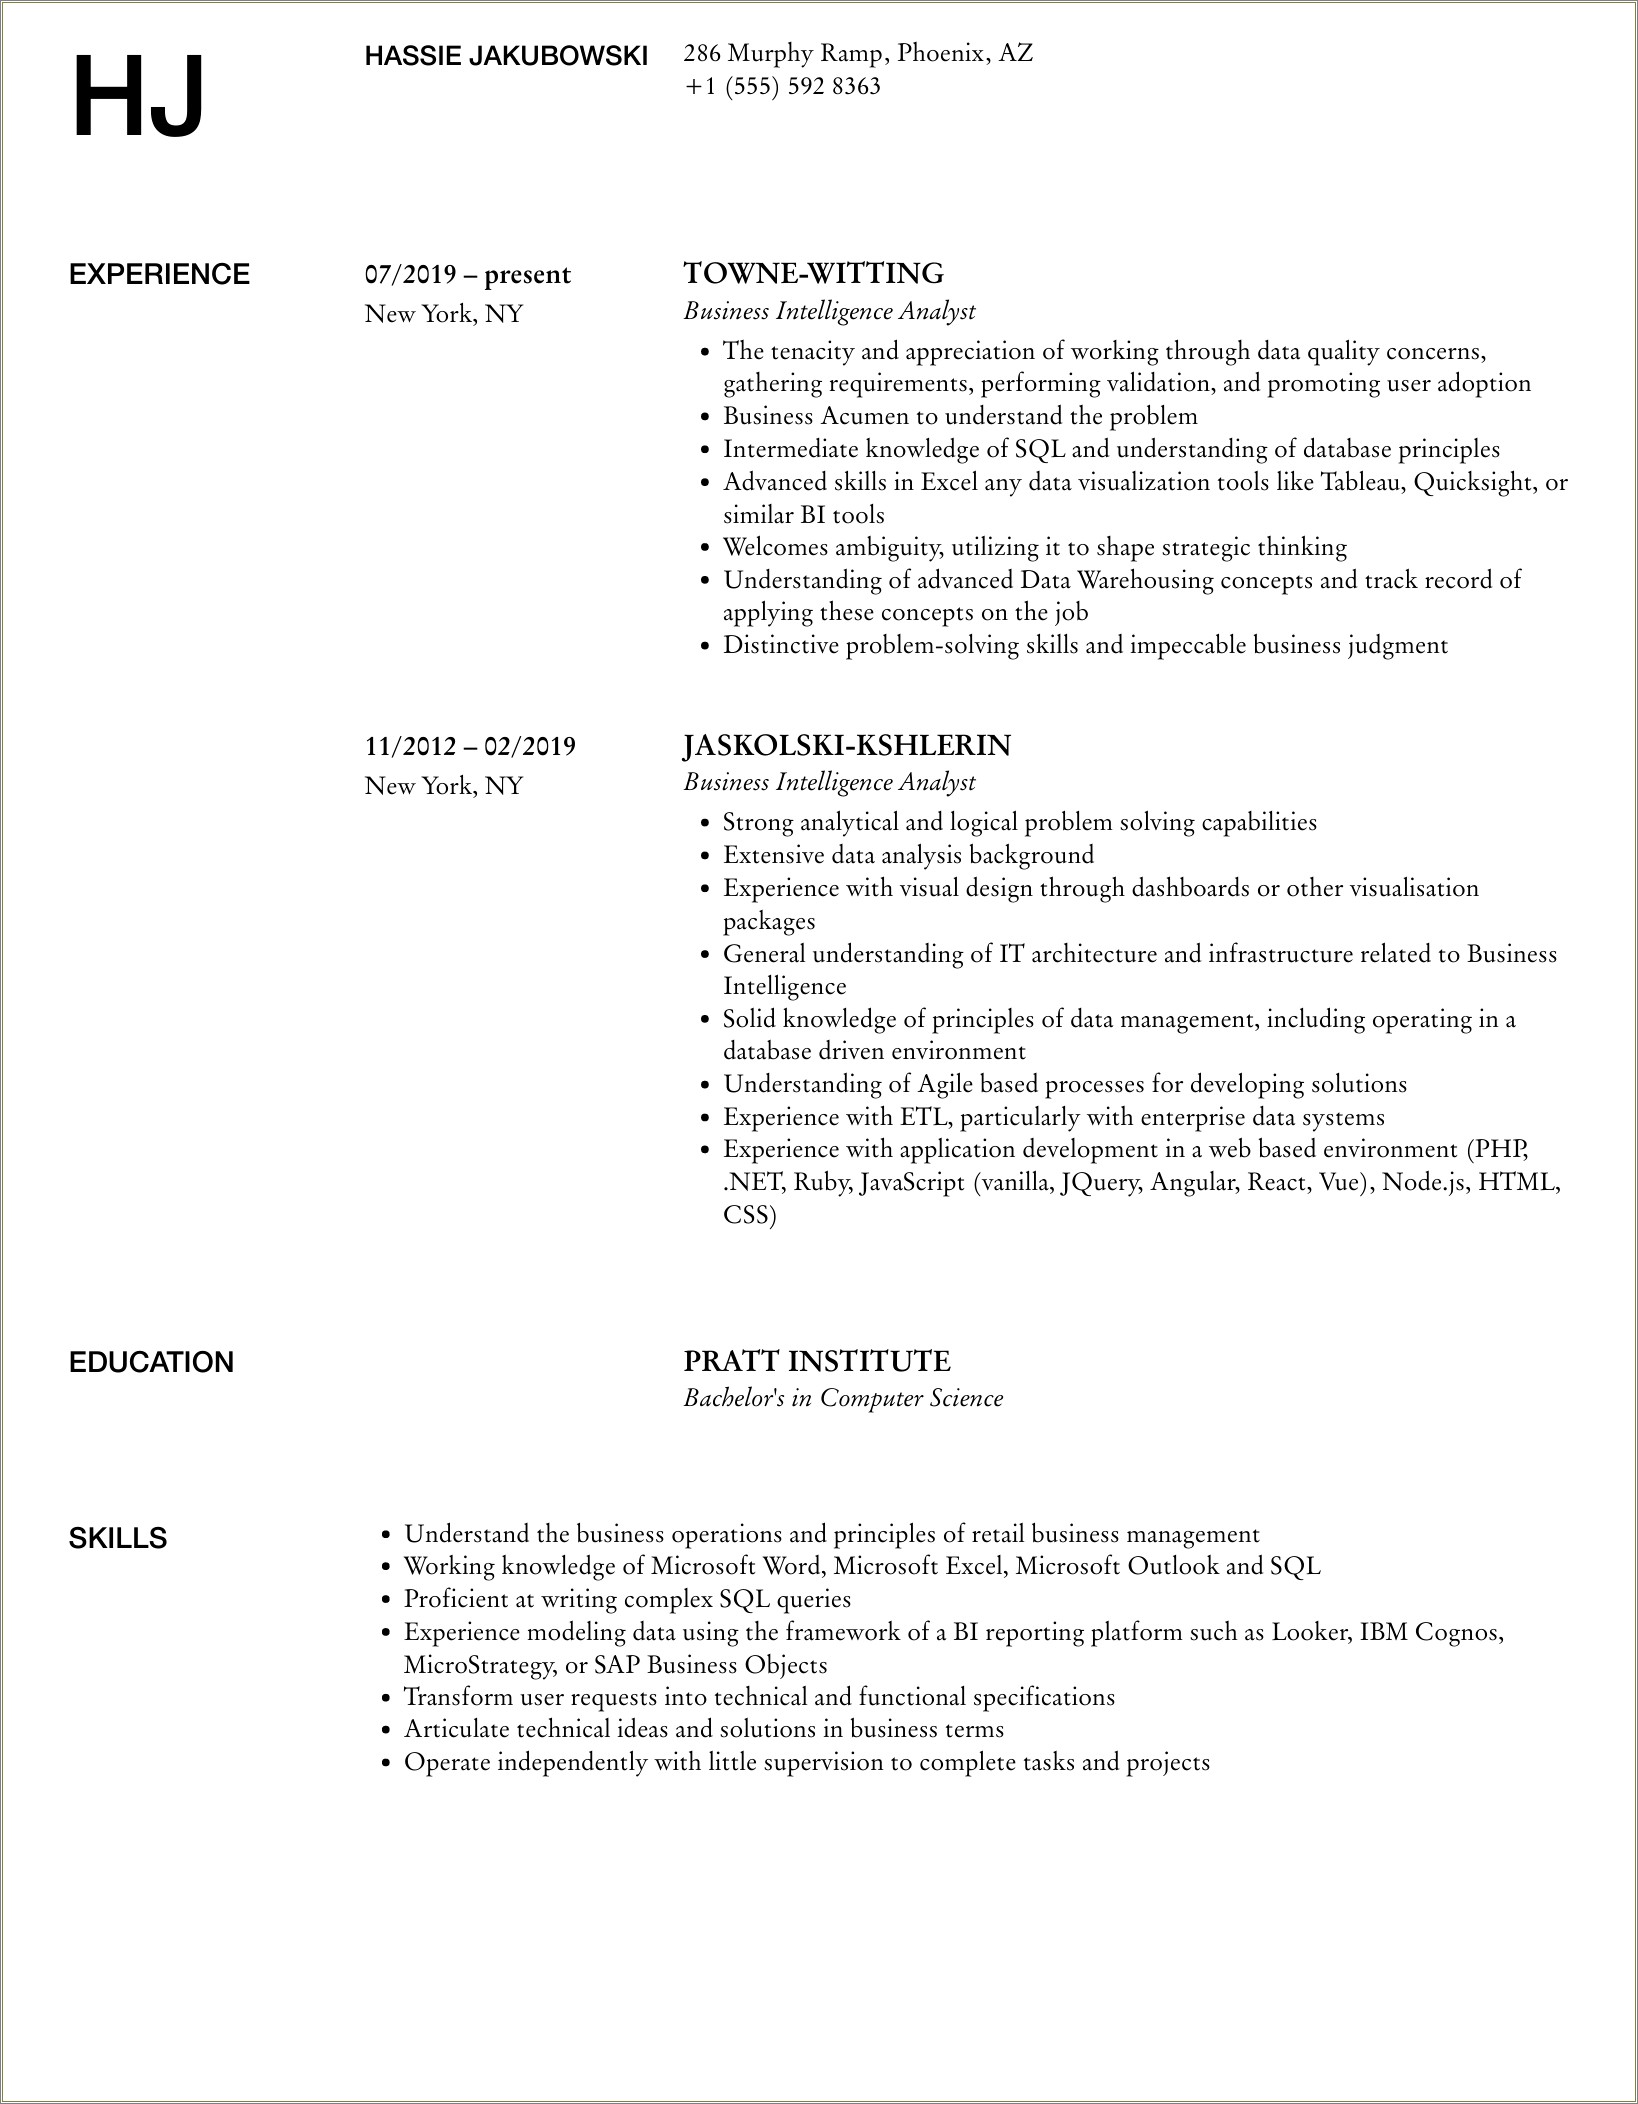 Resume Summary Bullet Points For Business Intelligence